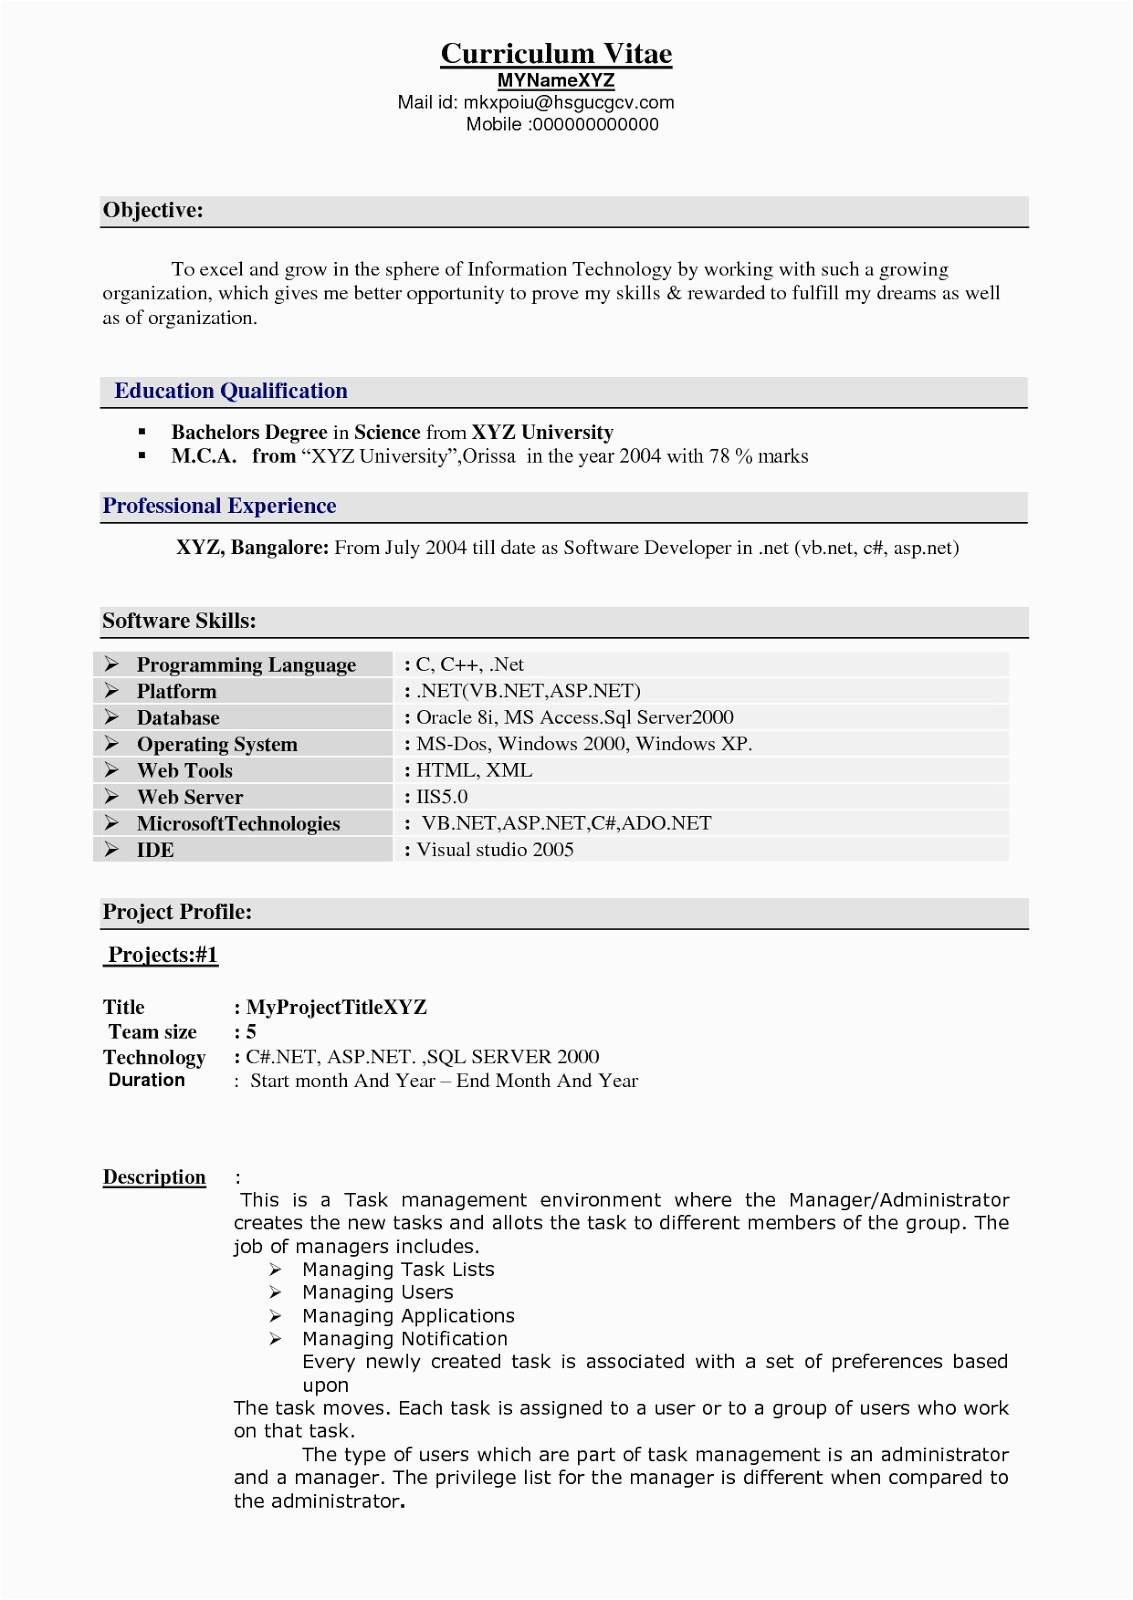 Sample Resume for 2 Years Experience software Developer 2 Years Experience Resume Scribd India